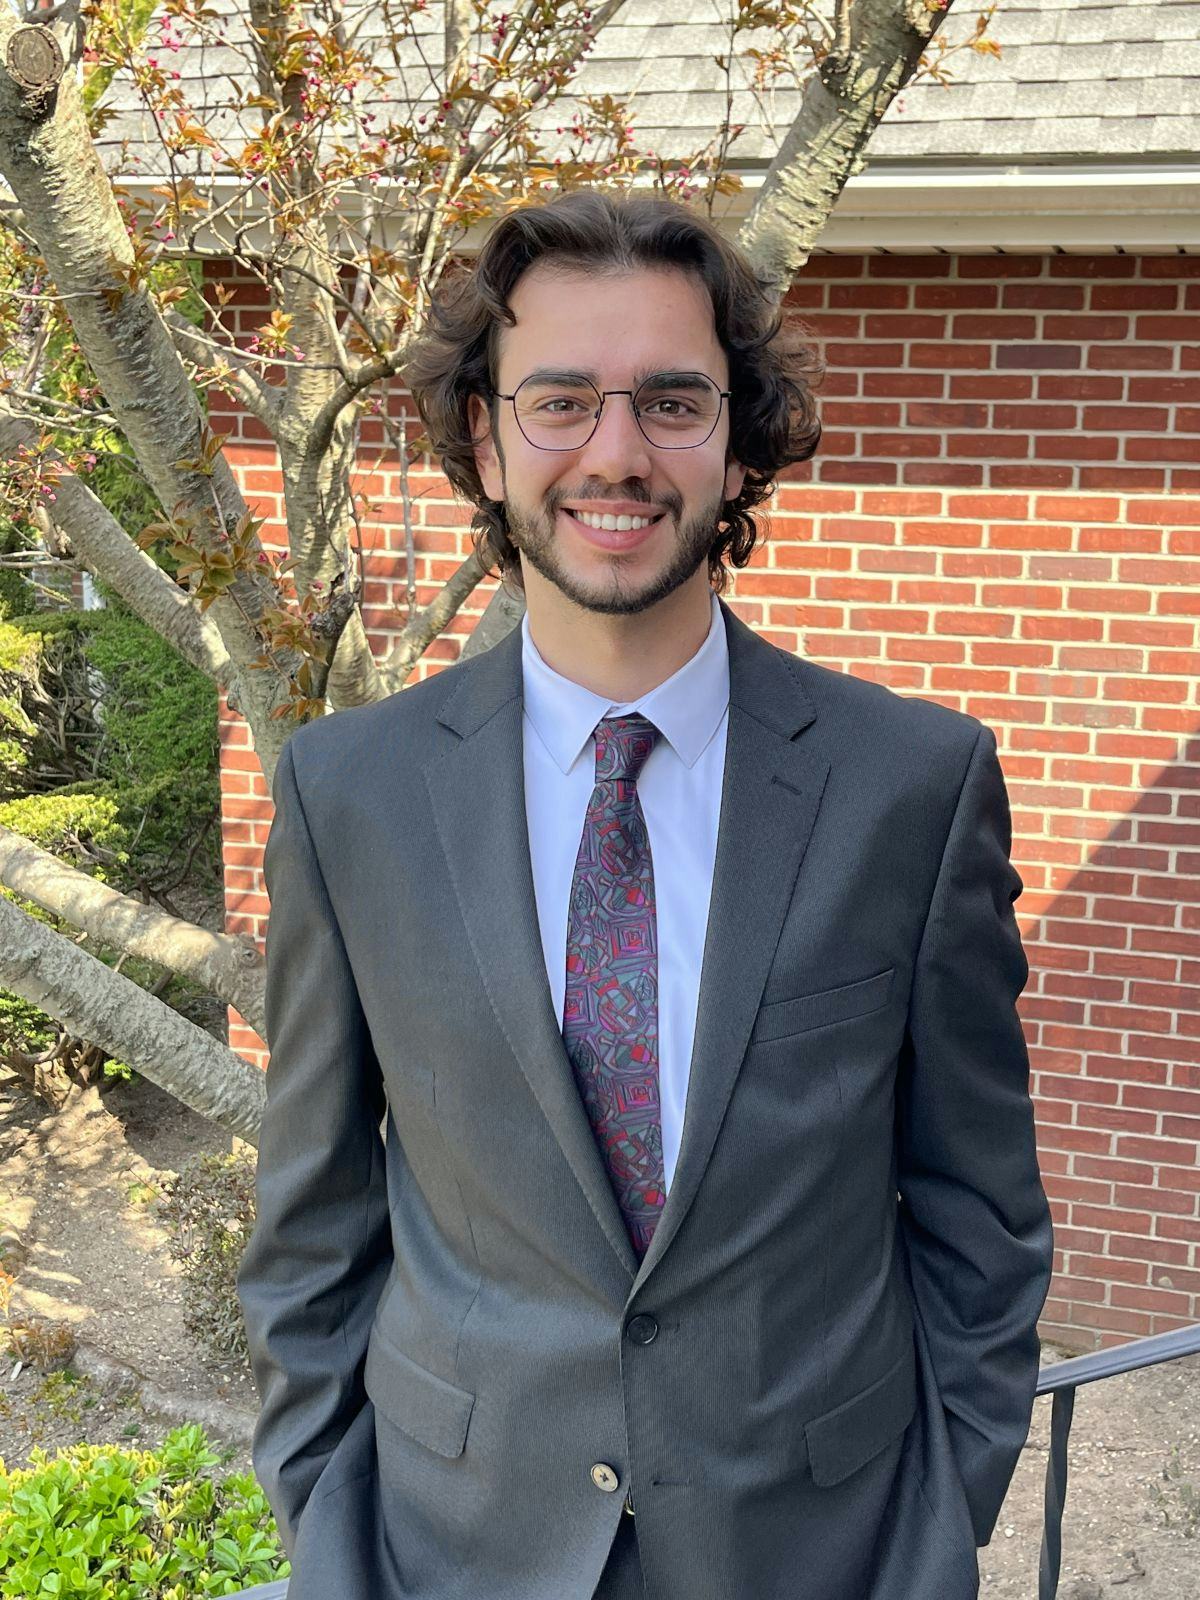 Mechanical engineering senior Drew Maggio ’23, wearing a suit and tie, smiles while standing outside in front of a tree.